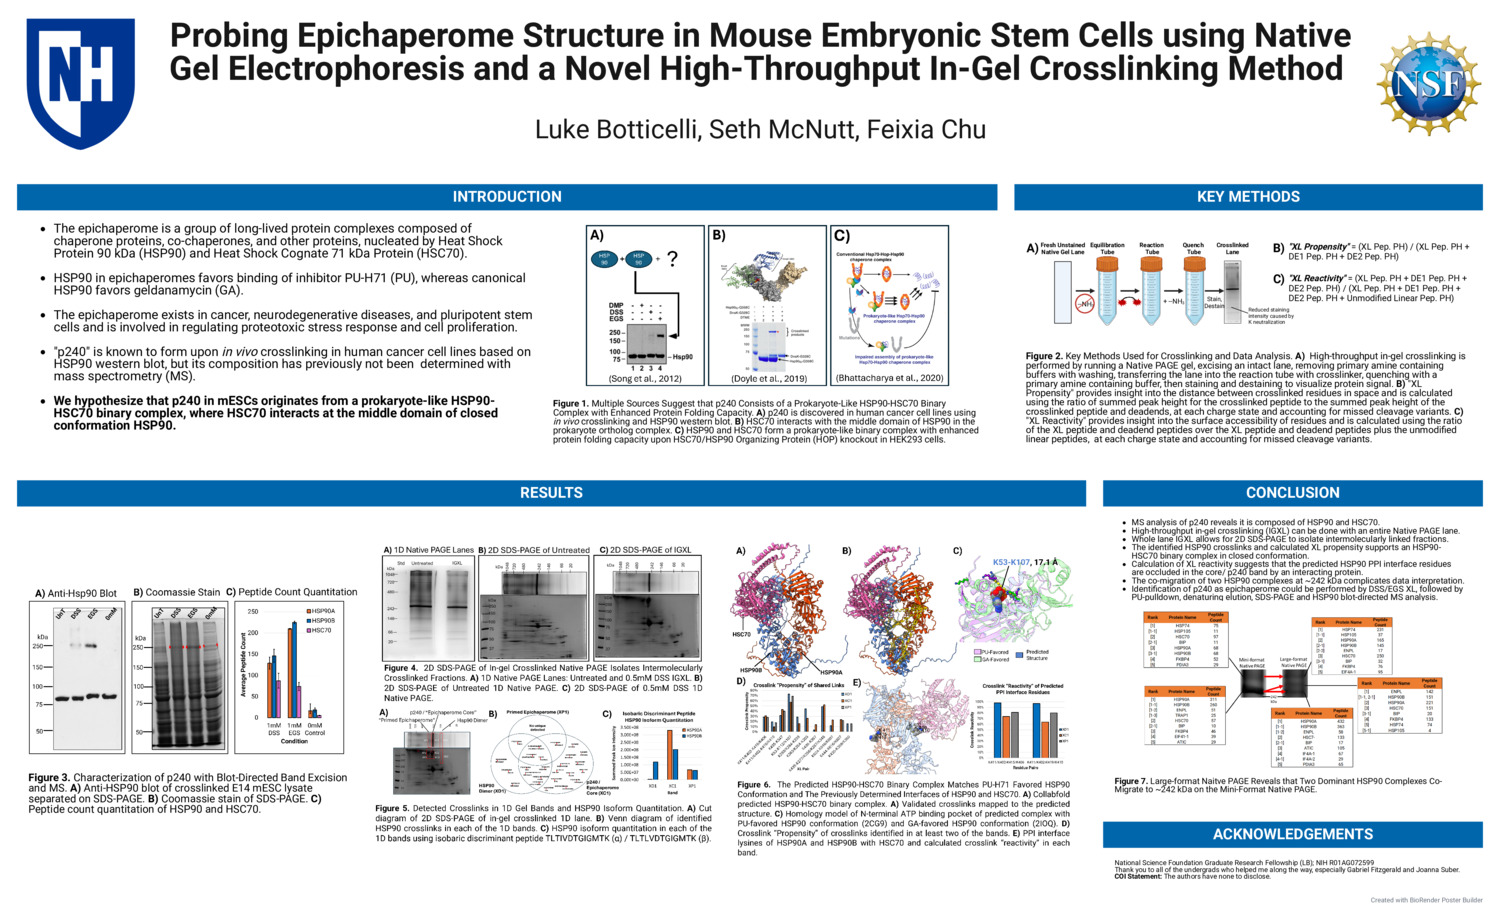 Probing Epichaperome Structure In Mouse Embryonic Stem Cells Using Native Gel Electrophoresis And A Novel High-Throughput In-Gel Crosslinking Method by lab1067